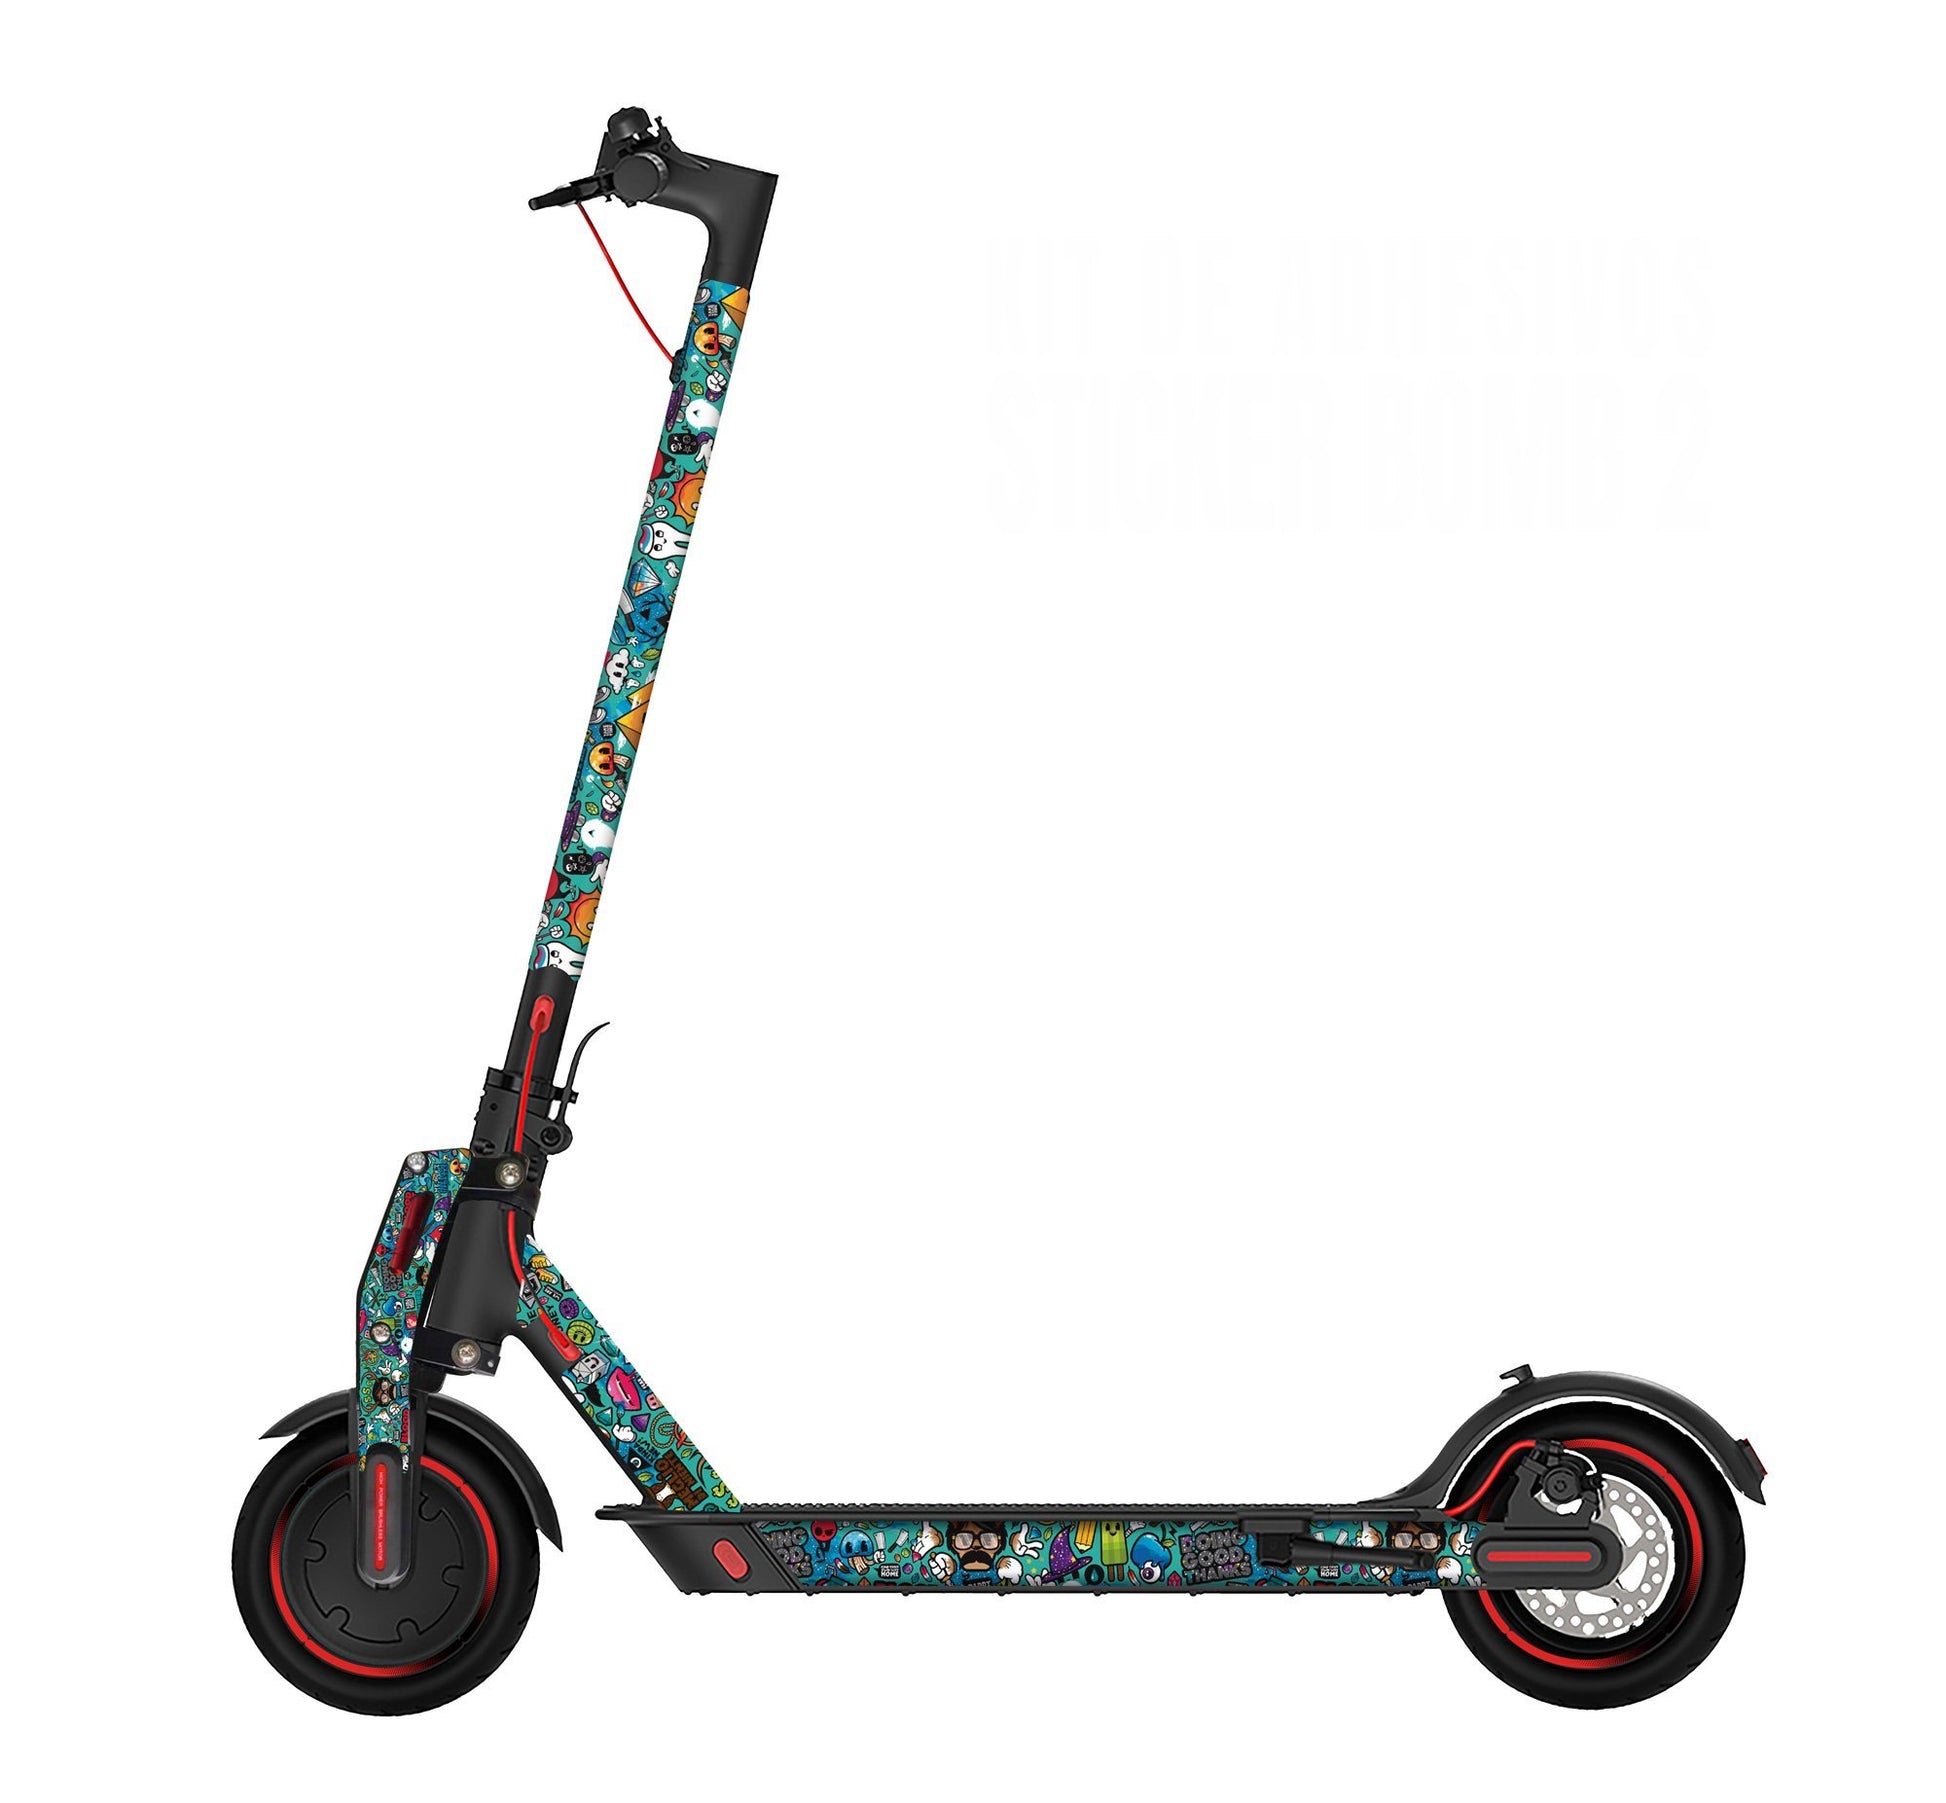 Vinyl Sticker Bomb for Xiaomi m365 scooter – Stylish Scooters